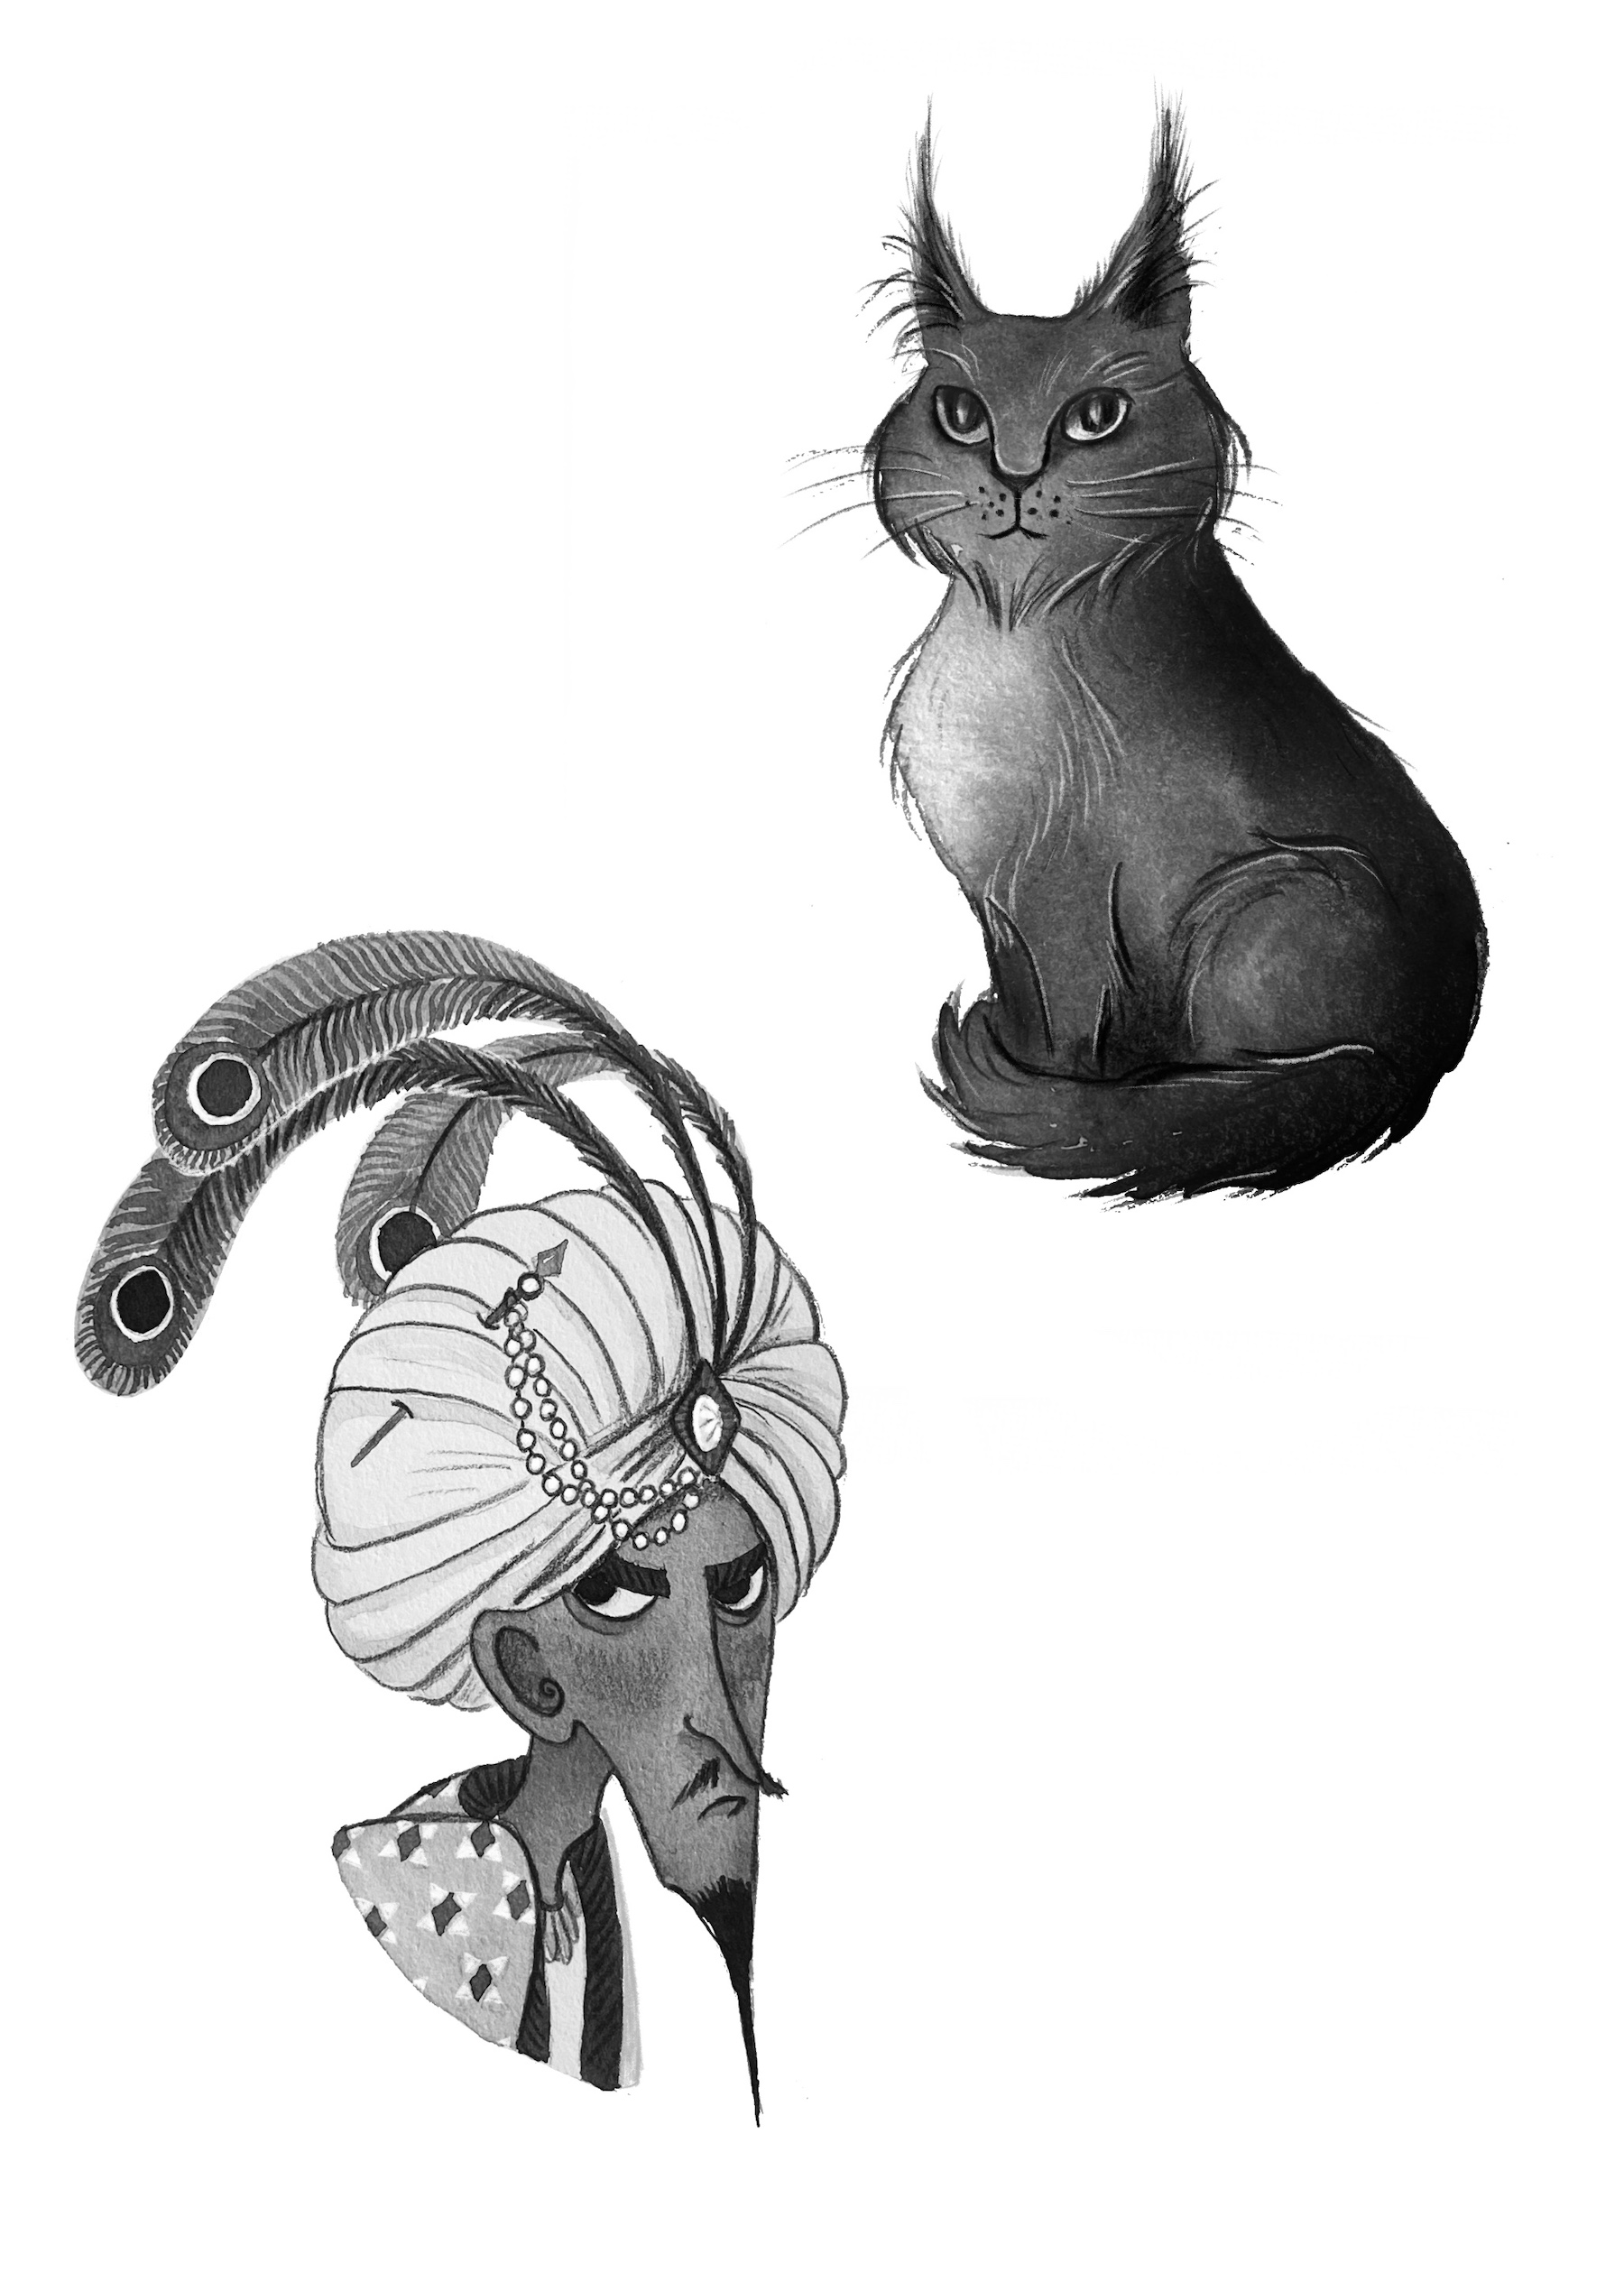 Black and white spot or chapter head illustrations of a cat and a man wearing a turban with jewels and feathers.